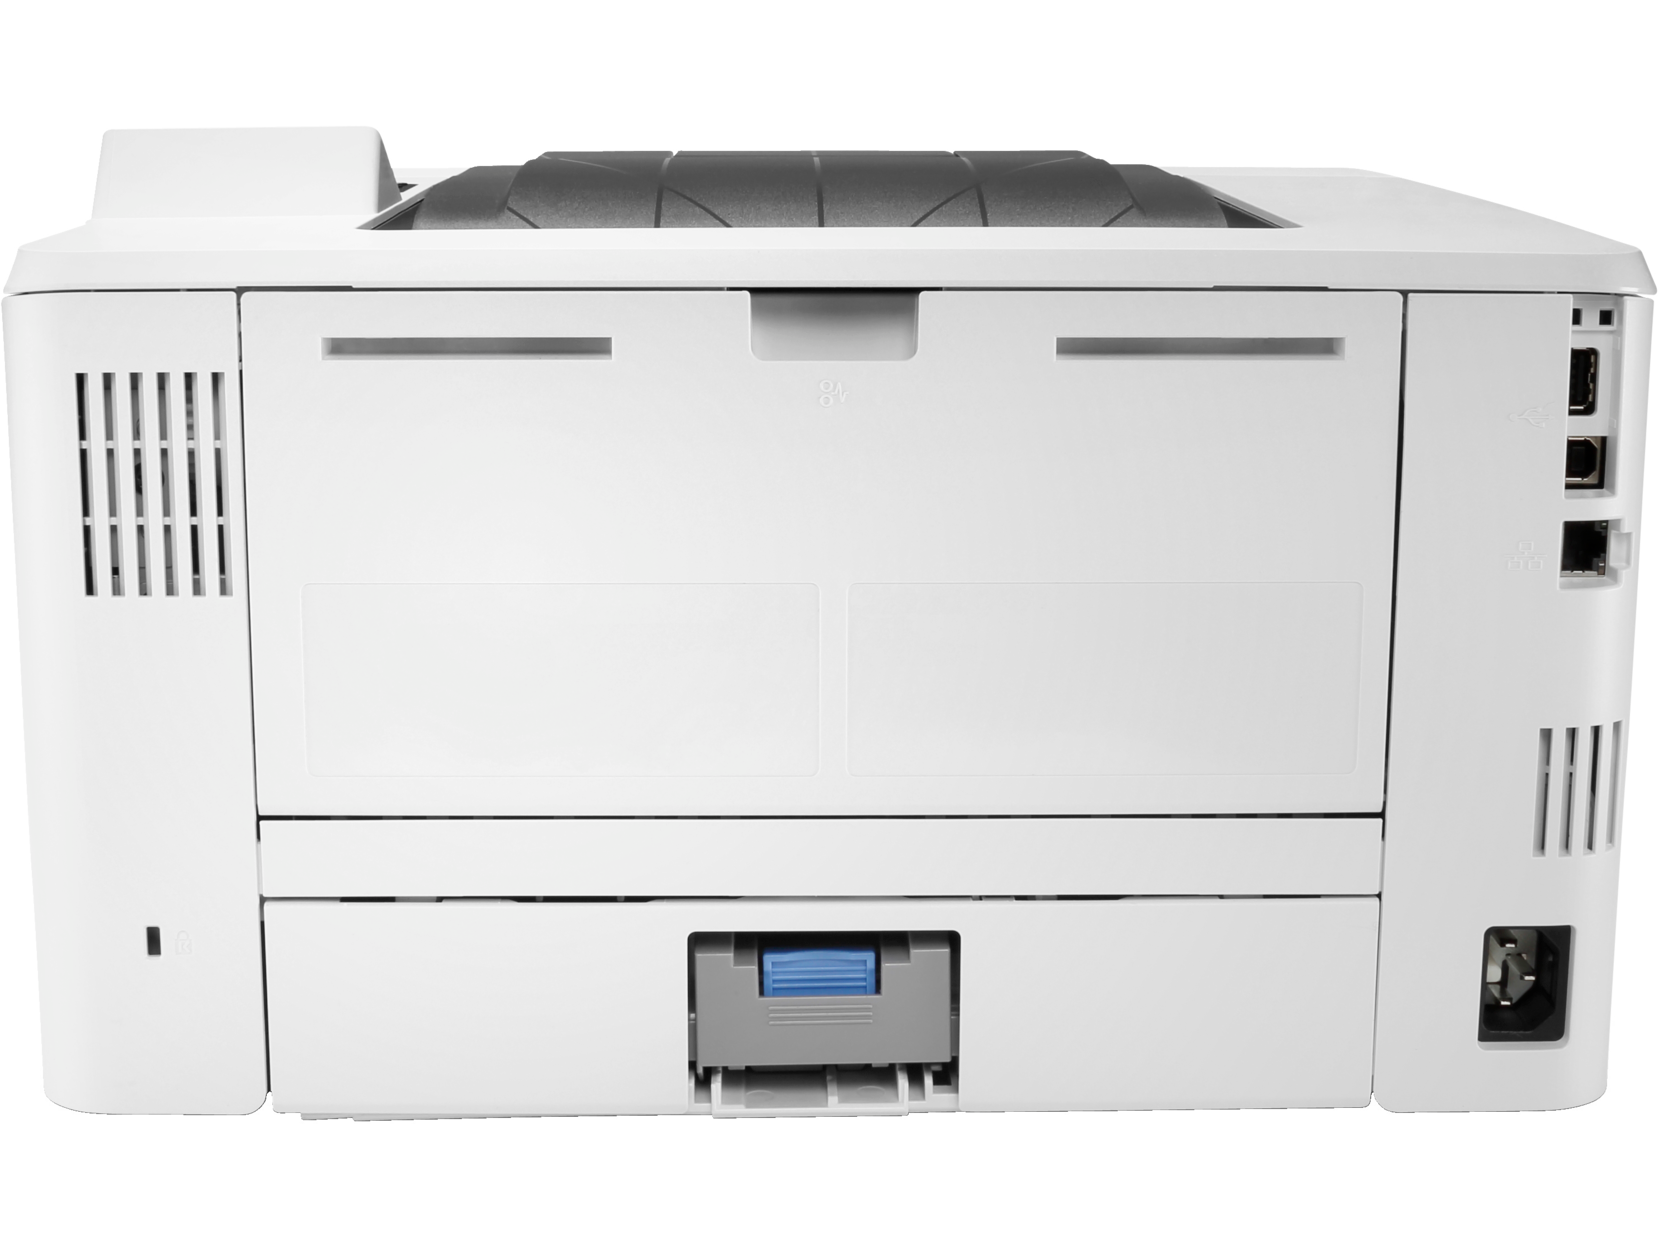 HP LaserJet Enterprise M406dn (3PZ15A) (1 Year Manufacture Local Warranty In Singapore)- Promo Price While Stock Last